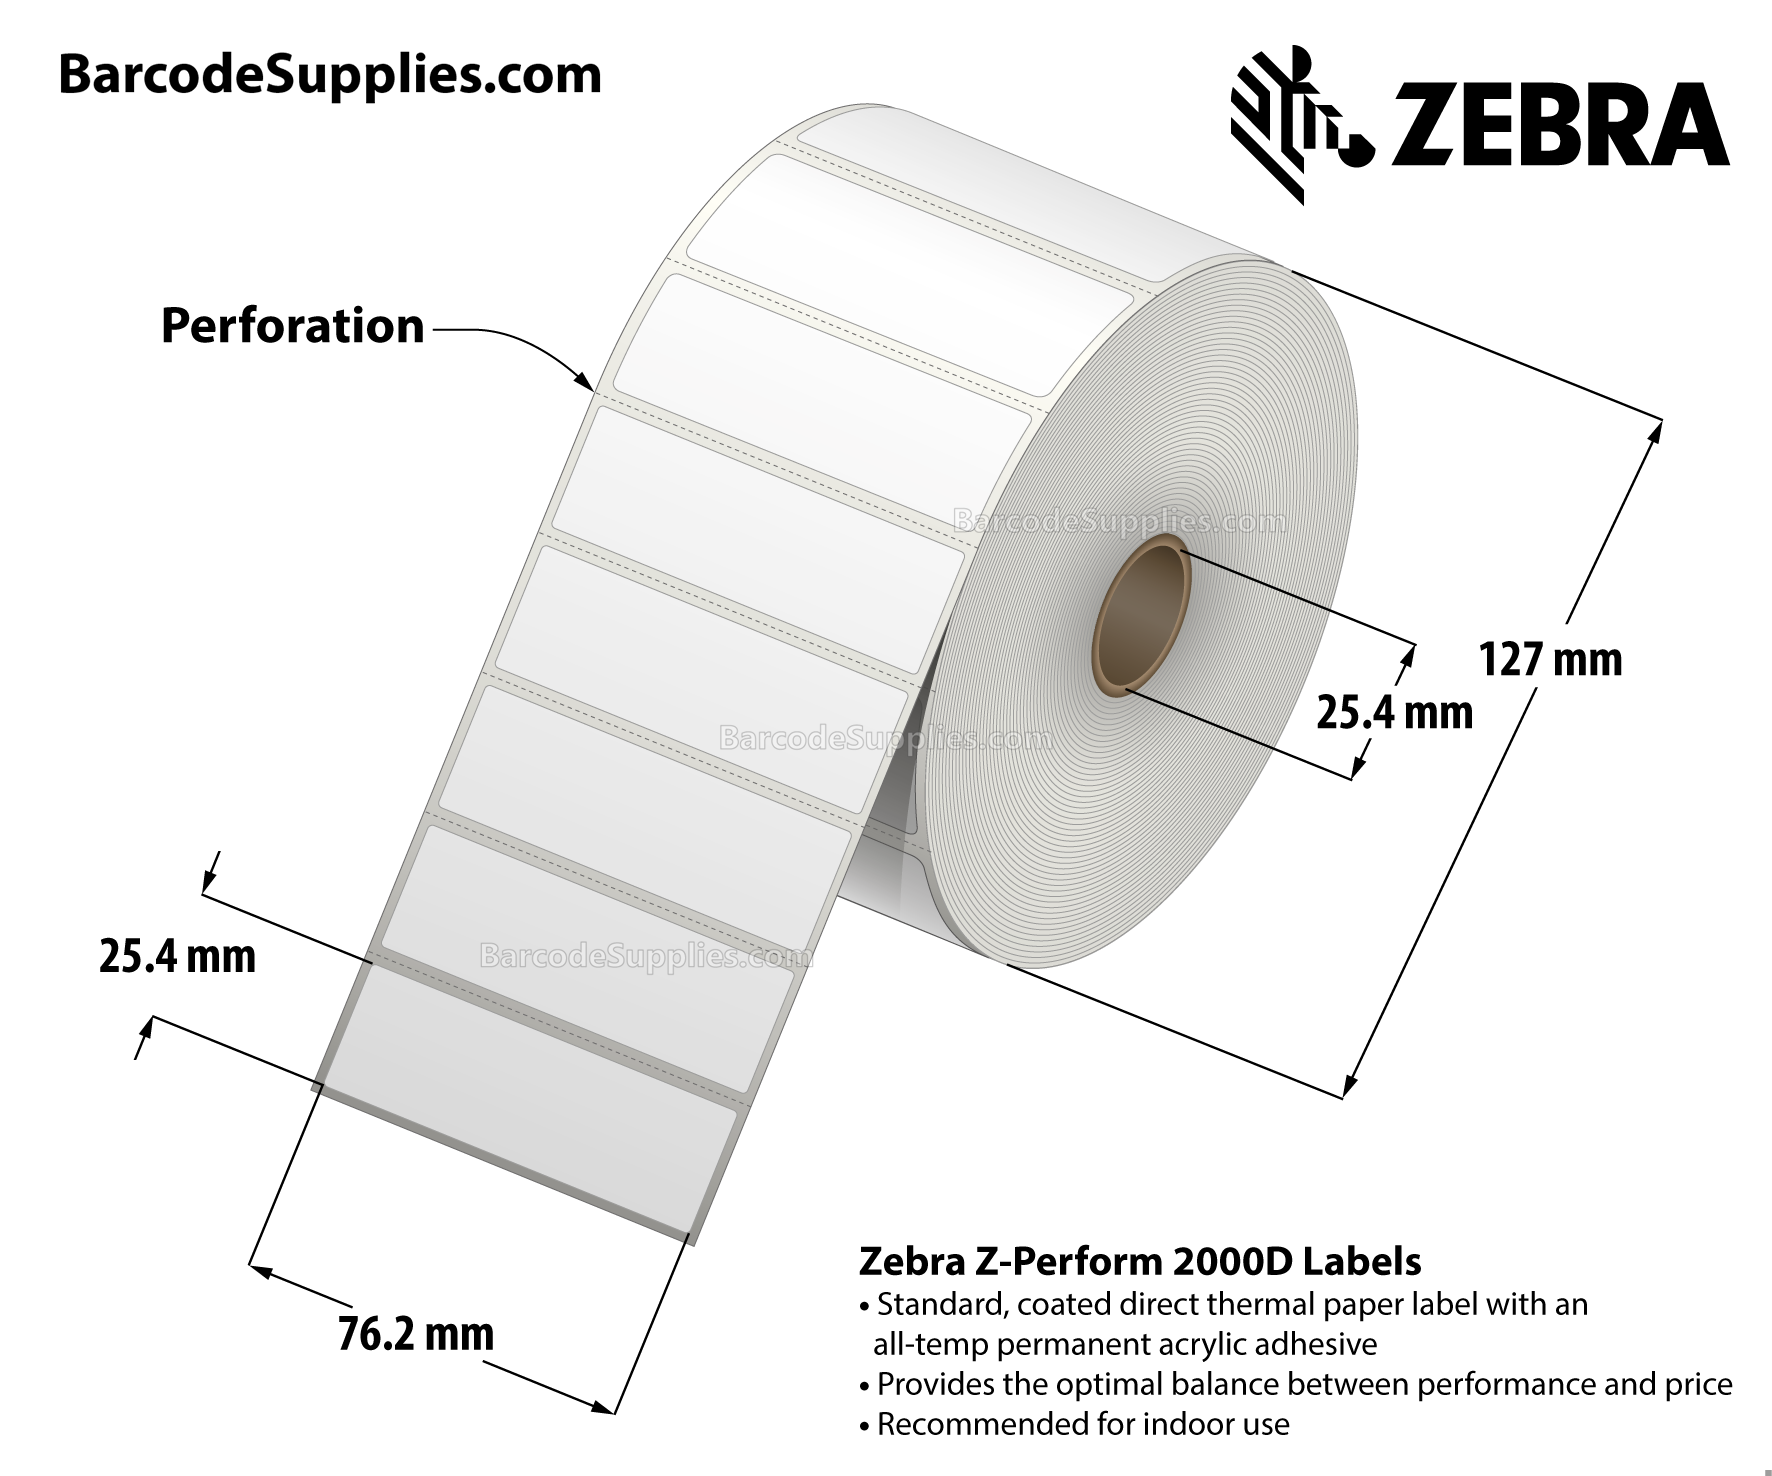 3 x 1 Direct Thermal White Z-Perform 2000D Labels With All-Temp Adhesive - Perforated - 2340 Labels Per Roll - Carton Of 6 Rolls - 14040 Labels Total - MPN: 10015782